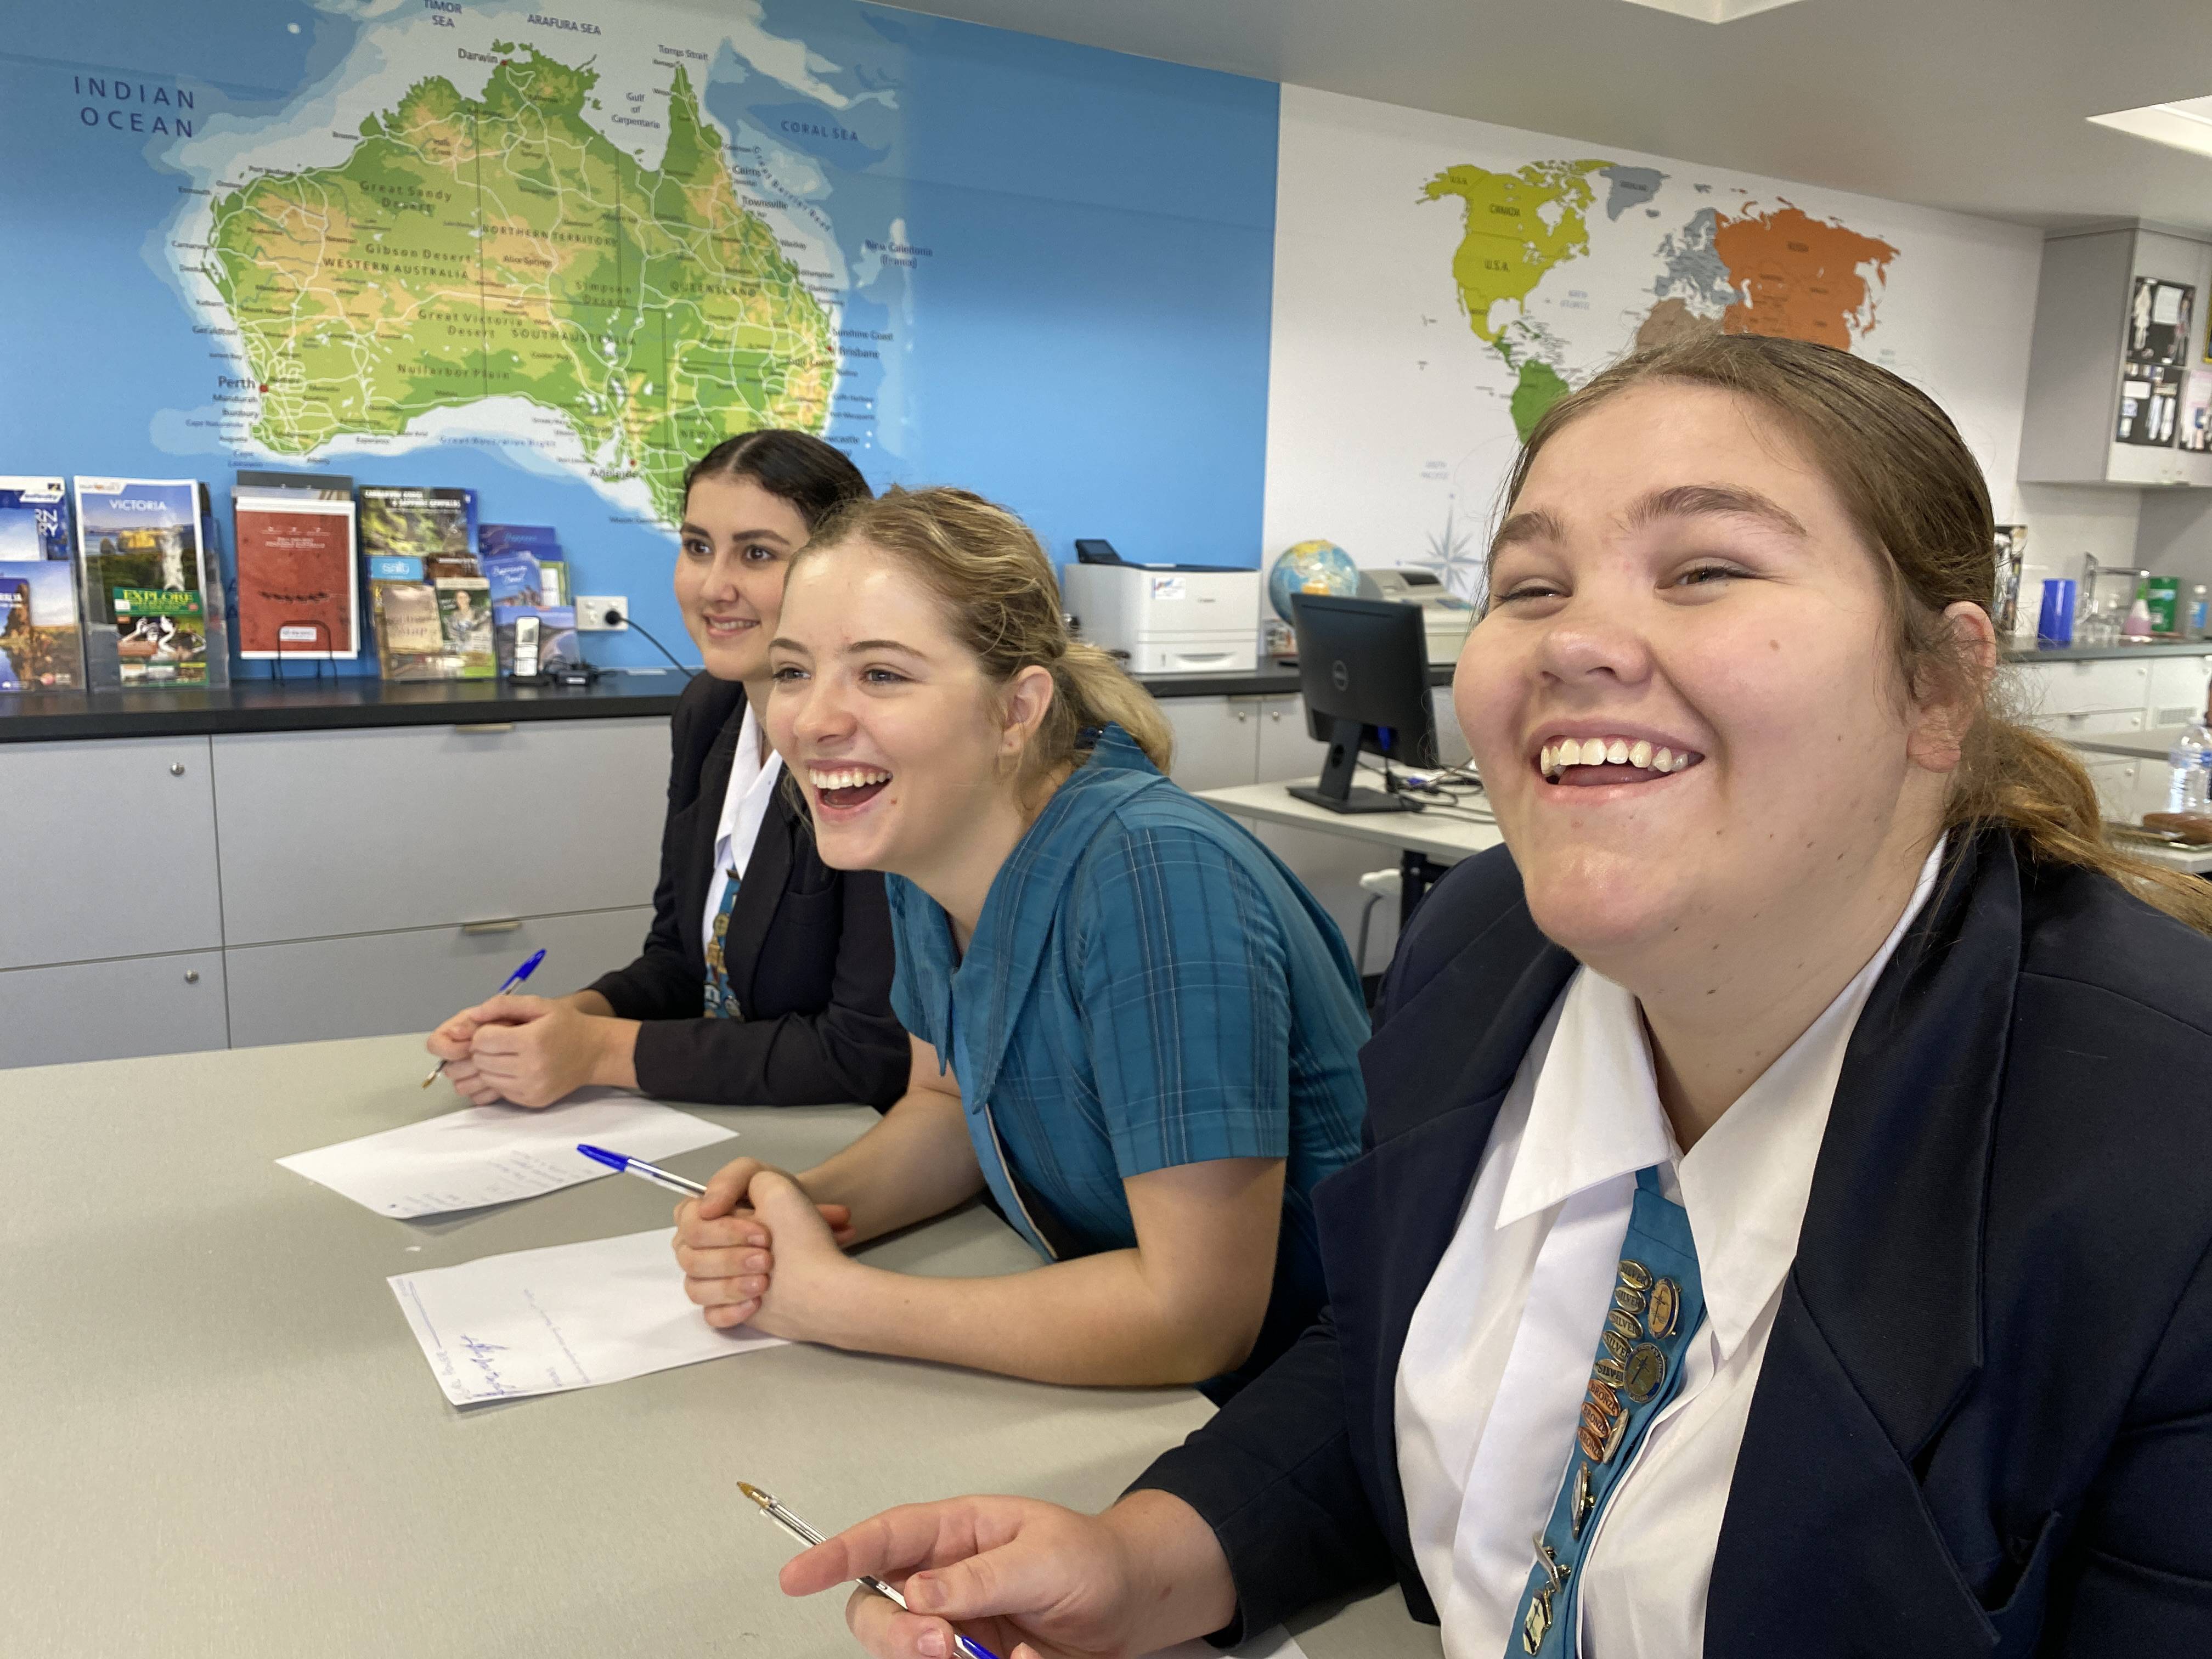 3 high school girls laughing in classroom